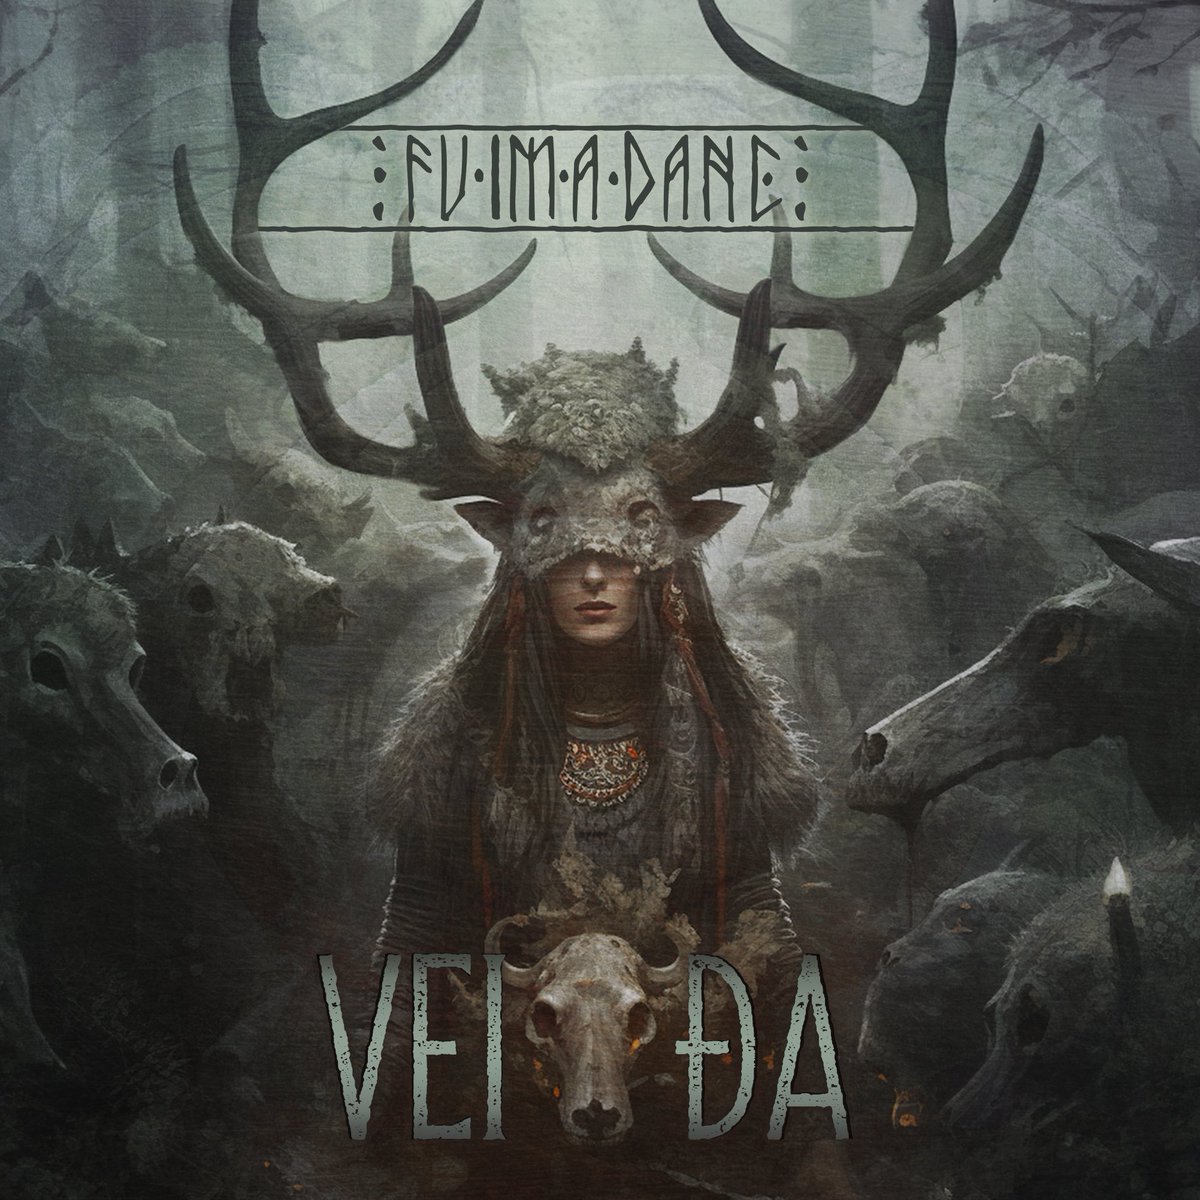 New track released: Veiða by #Fuimadane 
youtu.be/7r6N9eXx33s
Released on #bandcamp #SoundCloud #youtube and will also be released on #spotify & #itunes next month.

Amazing cover by @kessireusly  !!!!

fuimadane.bandcamp.com/album/the-sing…

#darkfolk #neofolk #ambientfolk #amplifiedhistory